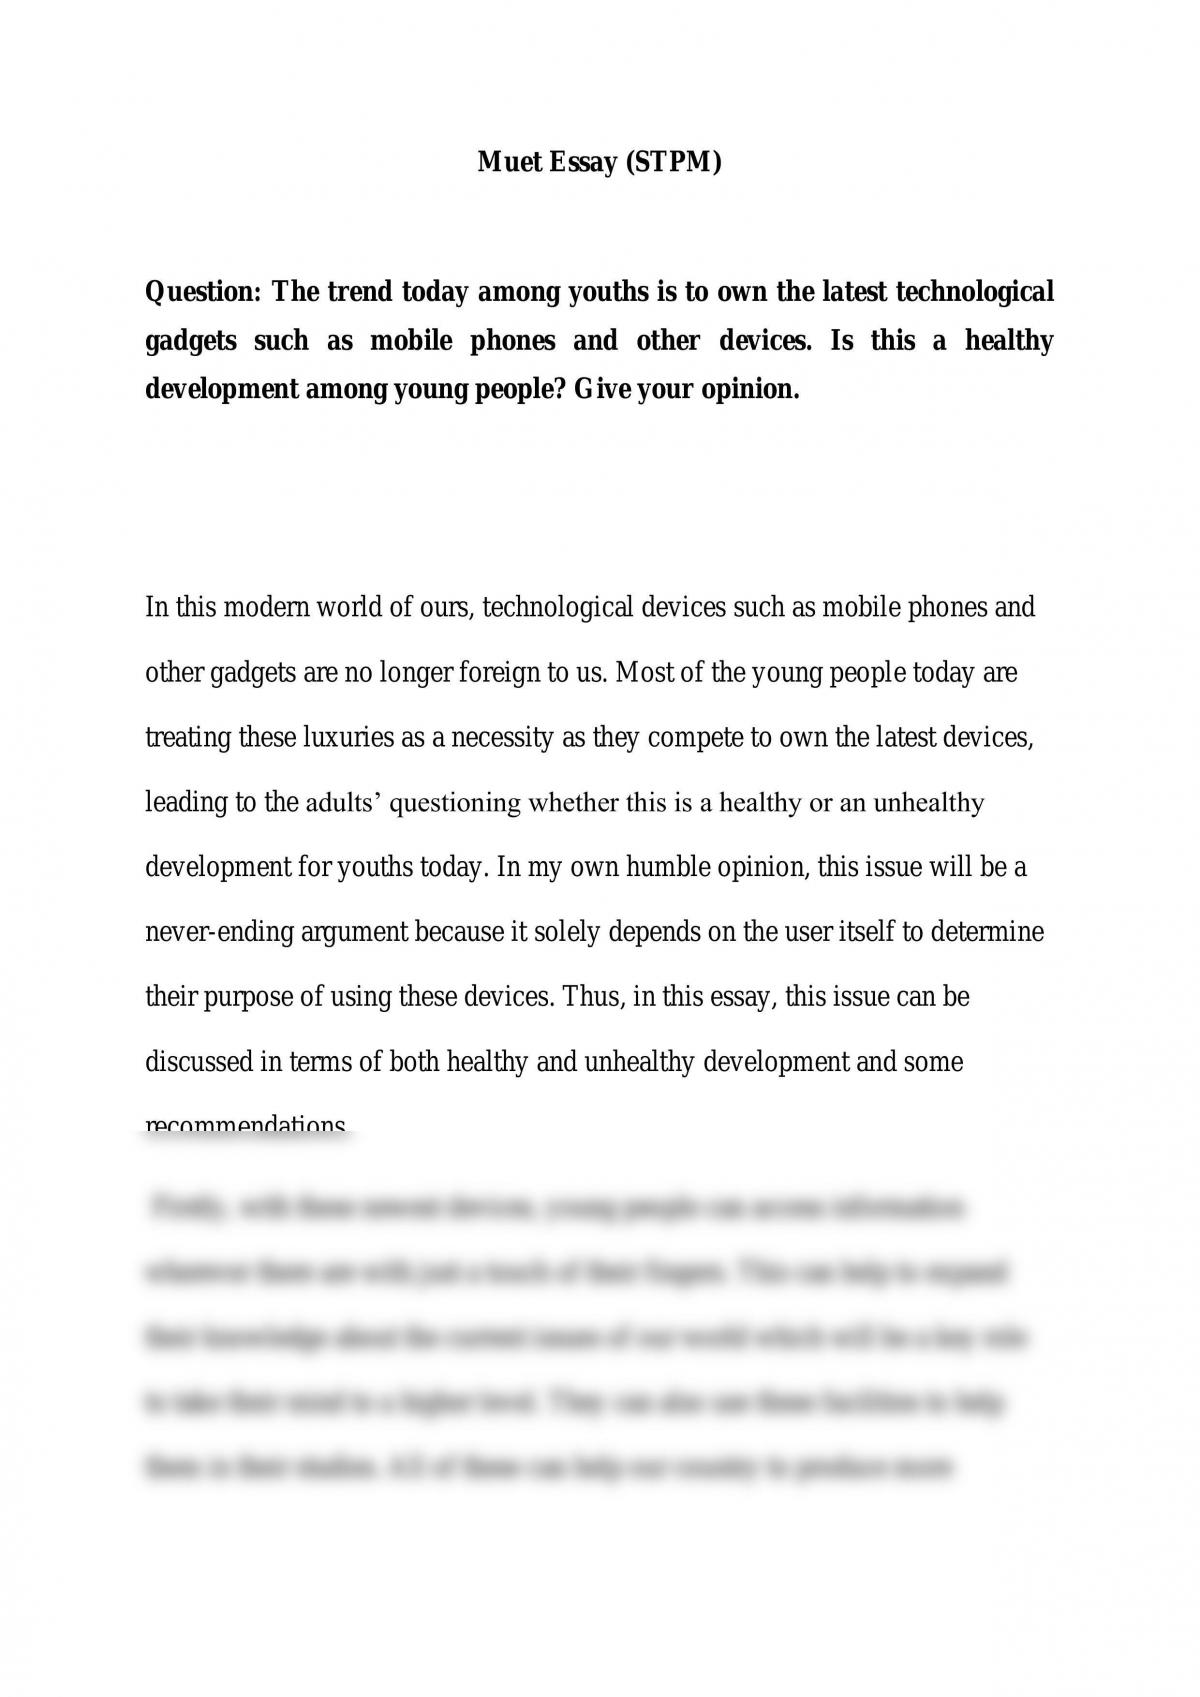 example email essay muet